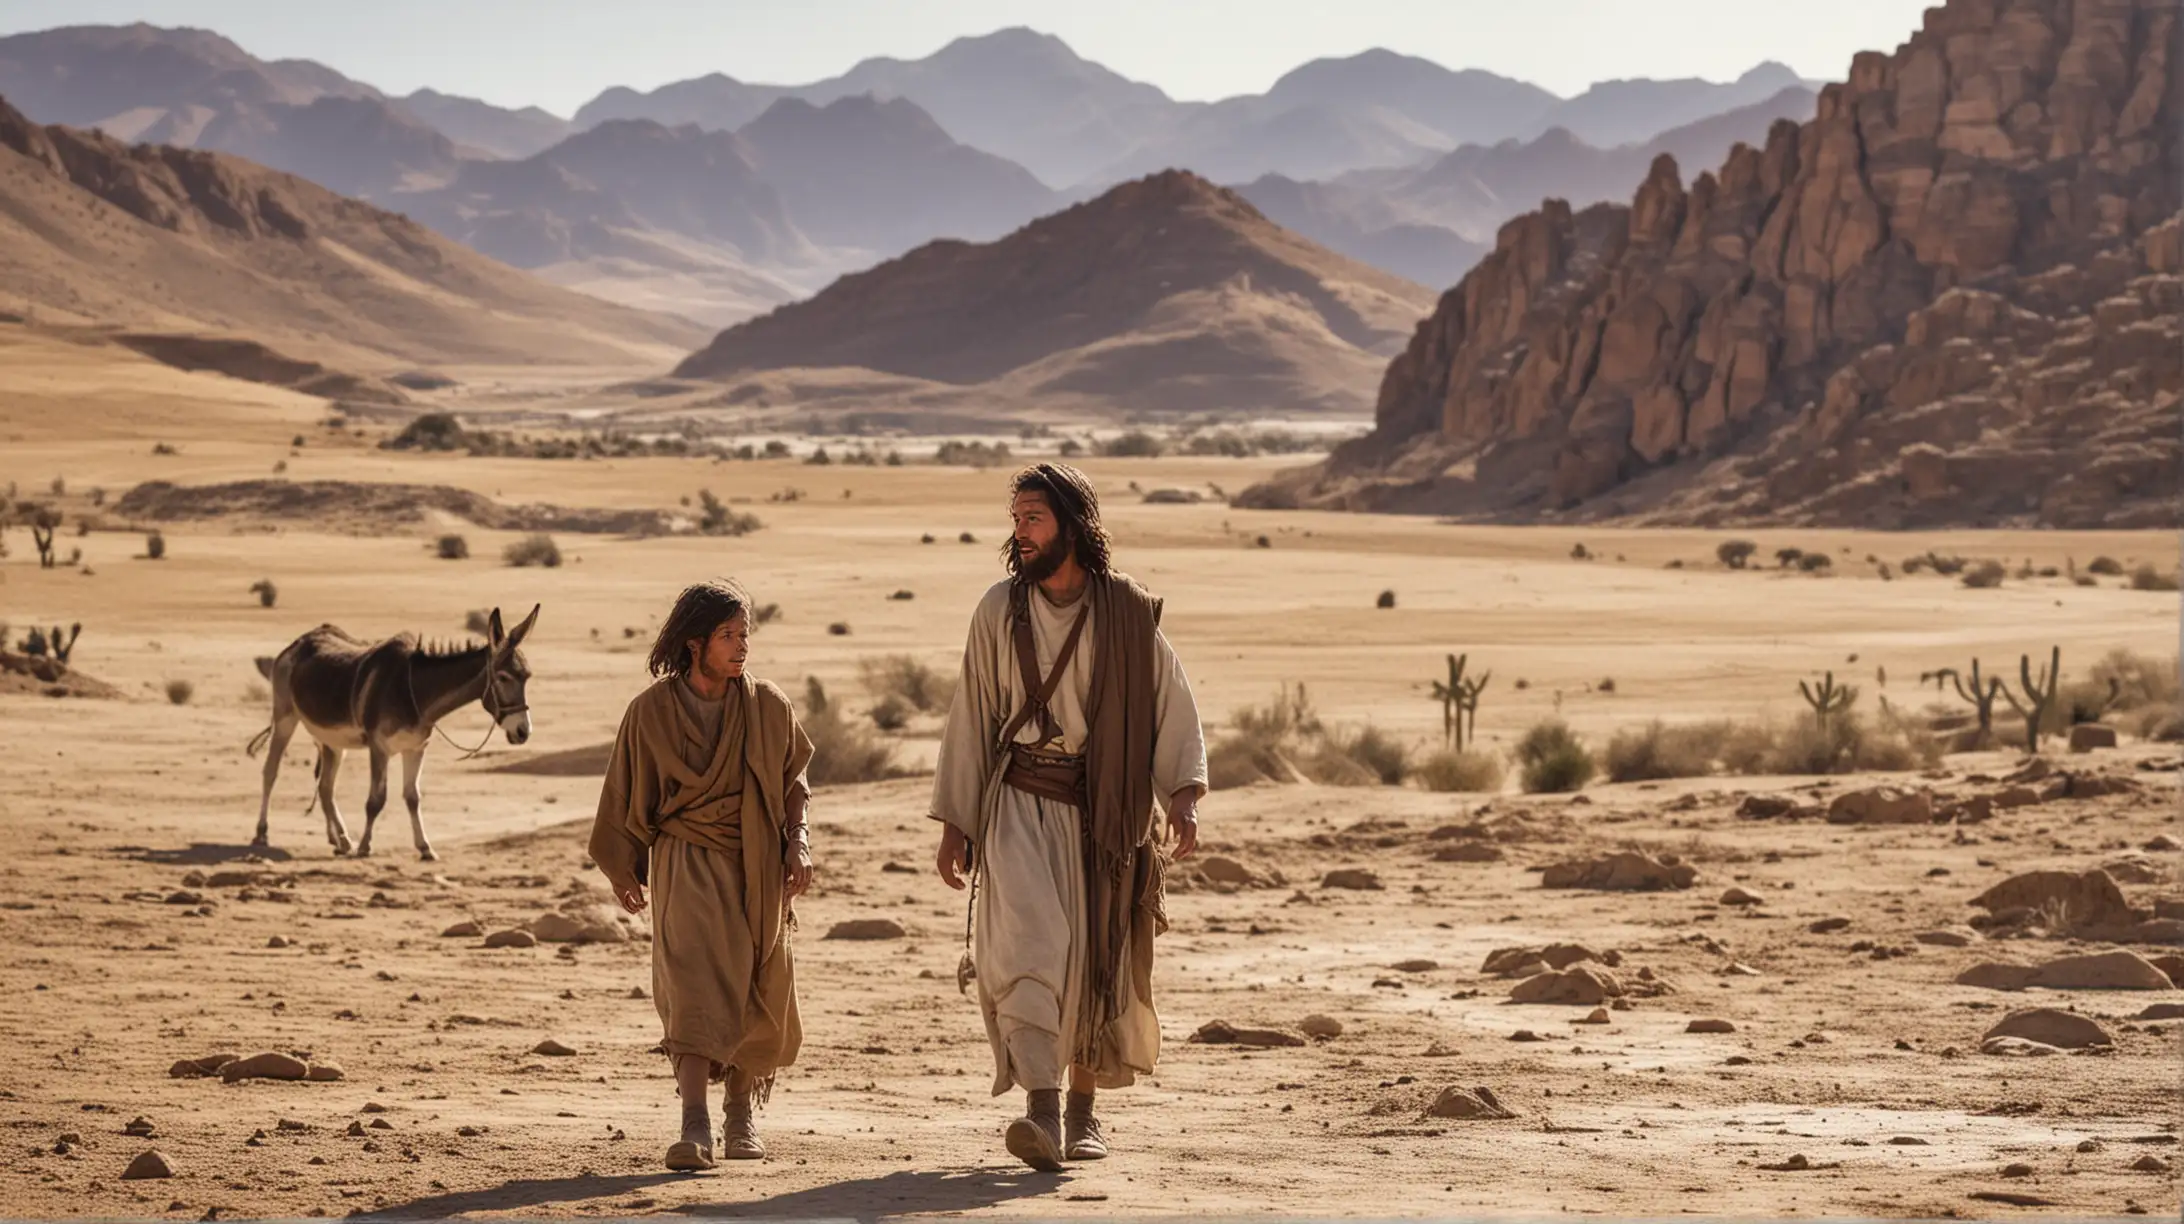 Woman in Jesus Time Walking with Man Child and Donkey in Desert Landscape